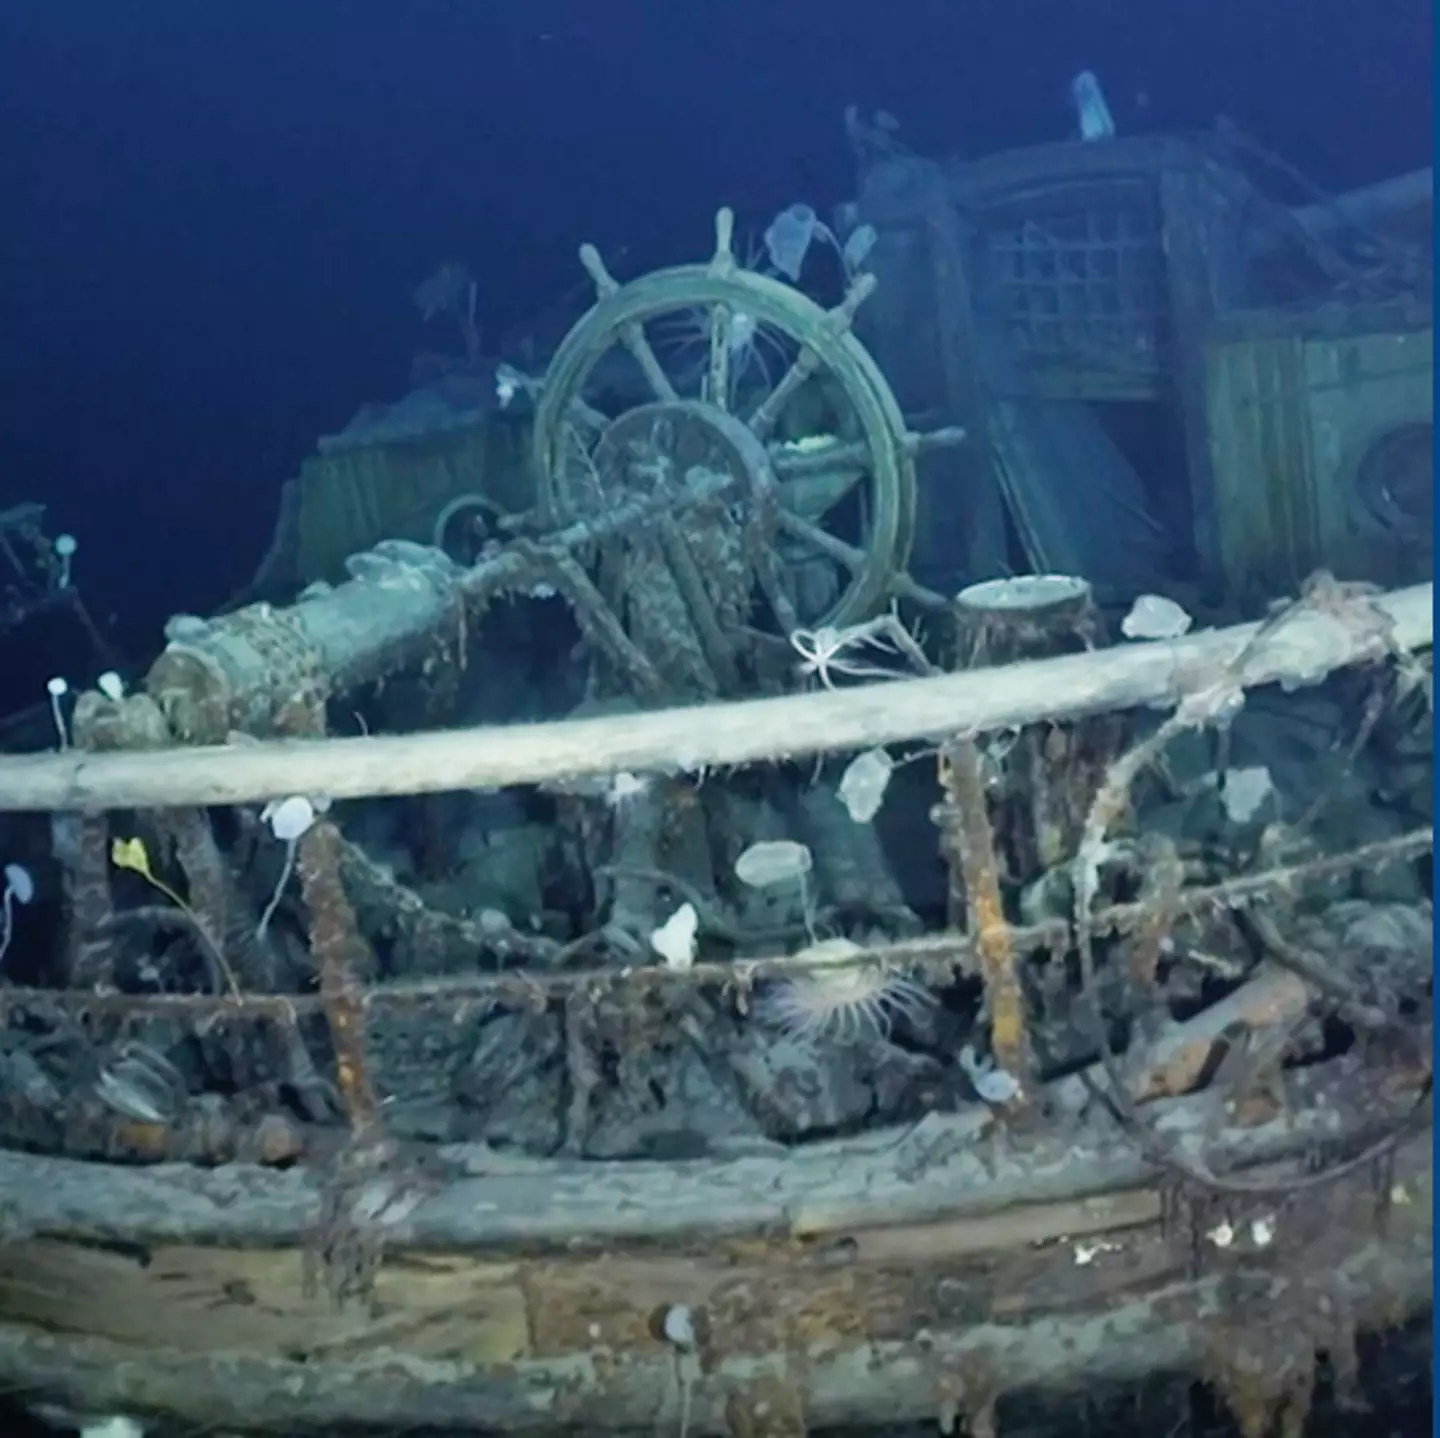 How Antarctic shipwreck discovered 10,000 feet beneath the surface remained frozen in time